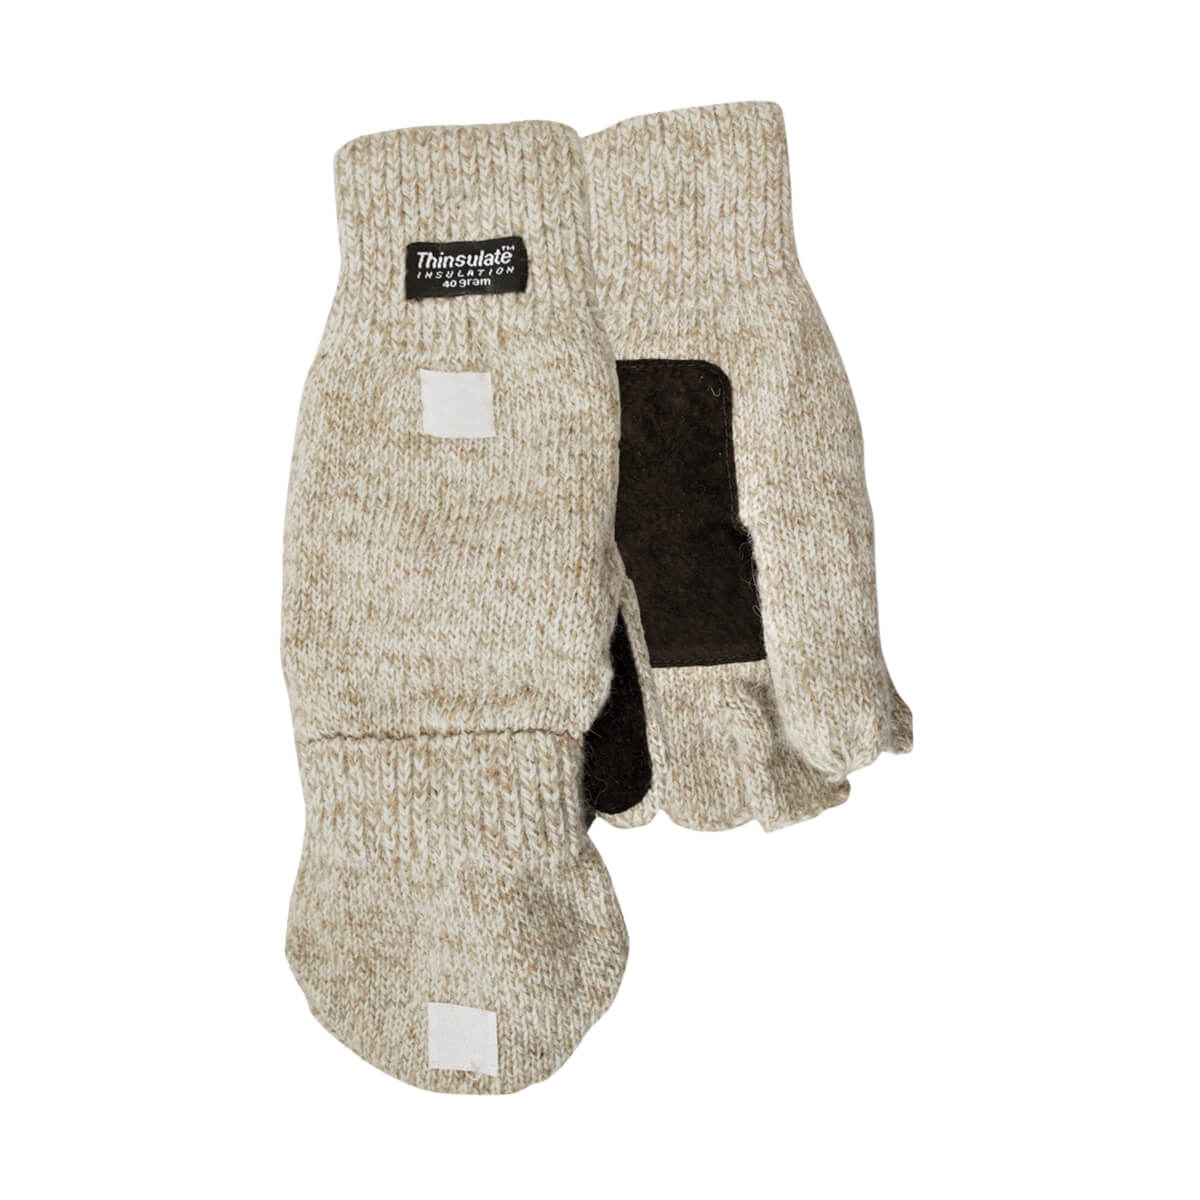 Wooly Mammoth Flip Top Gloves